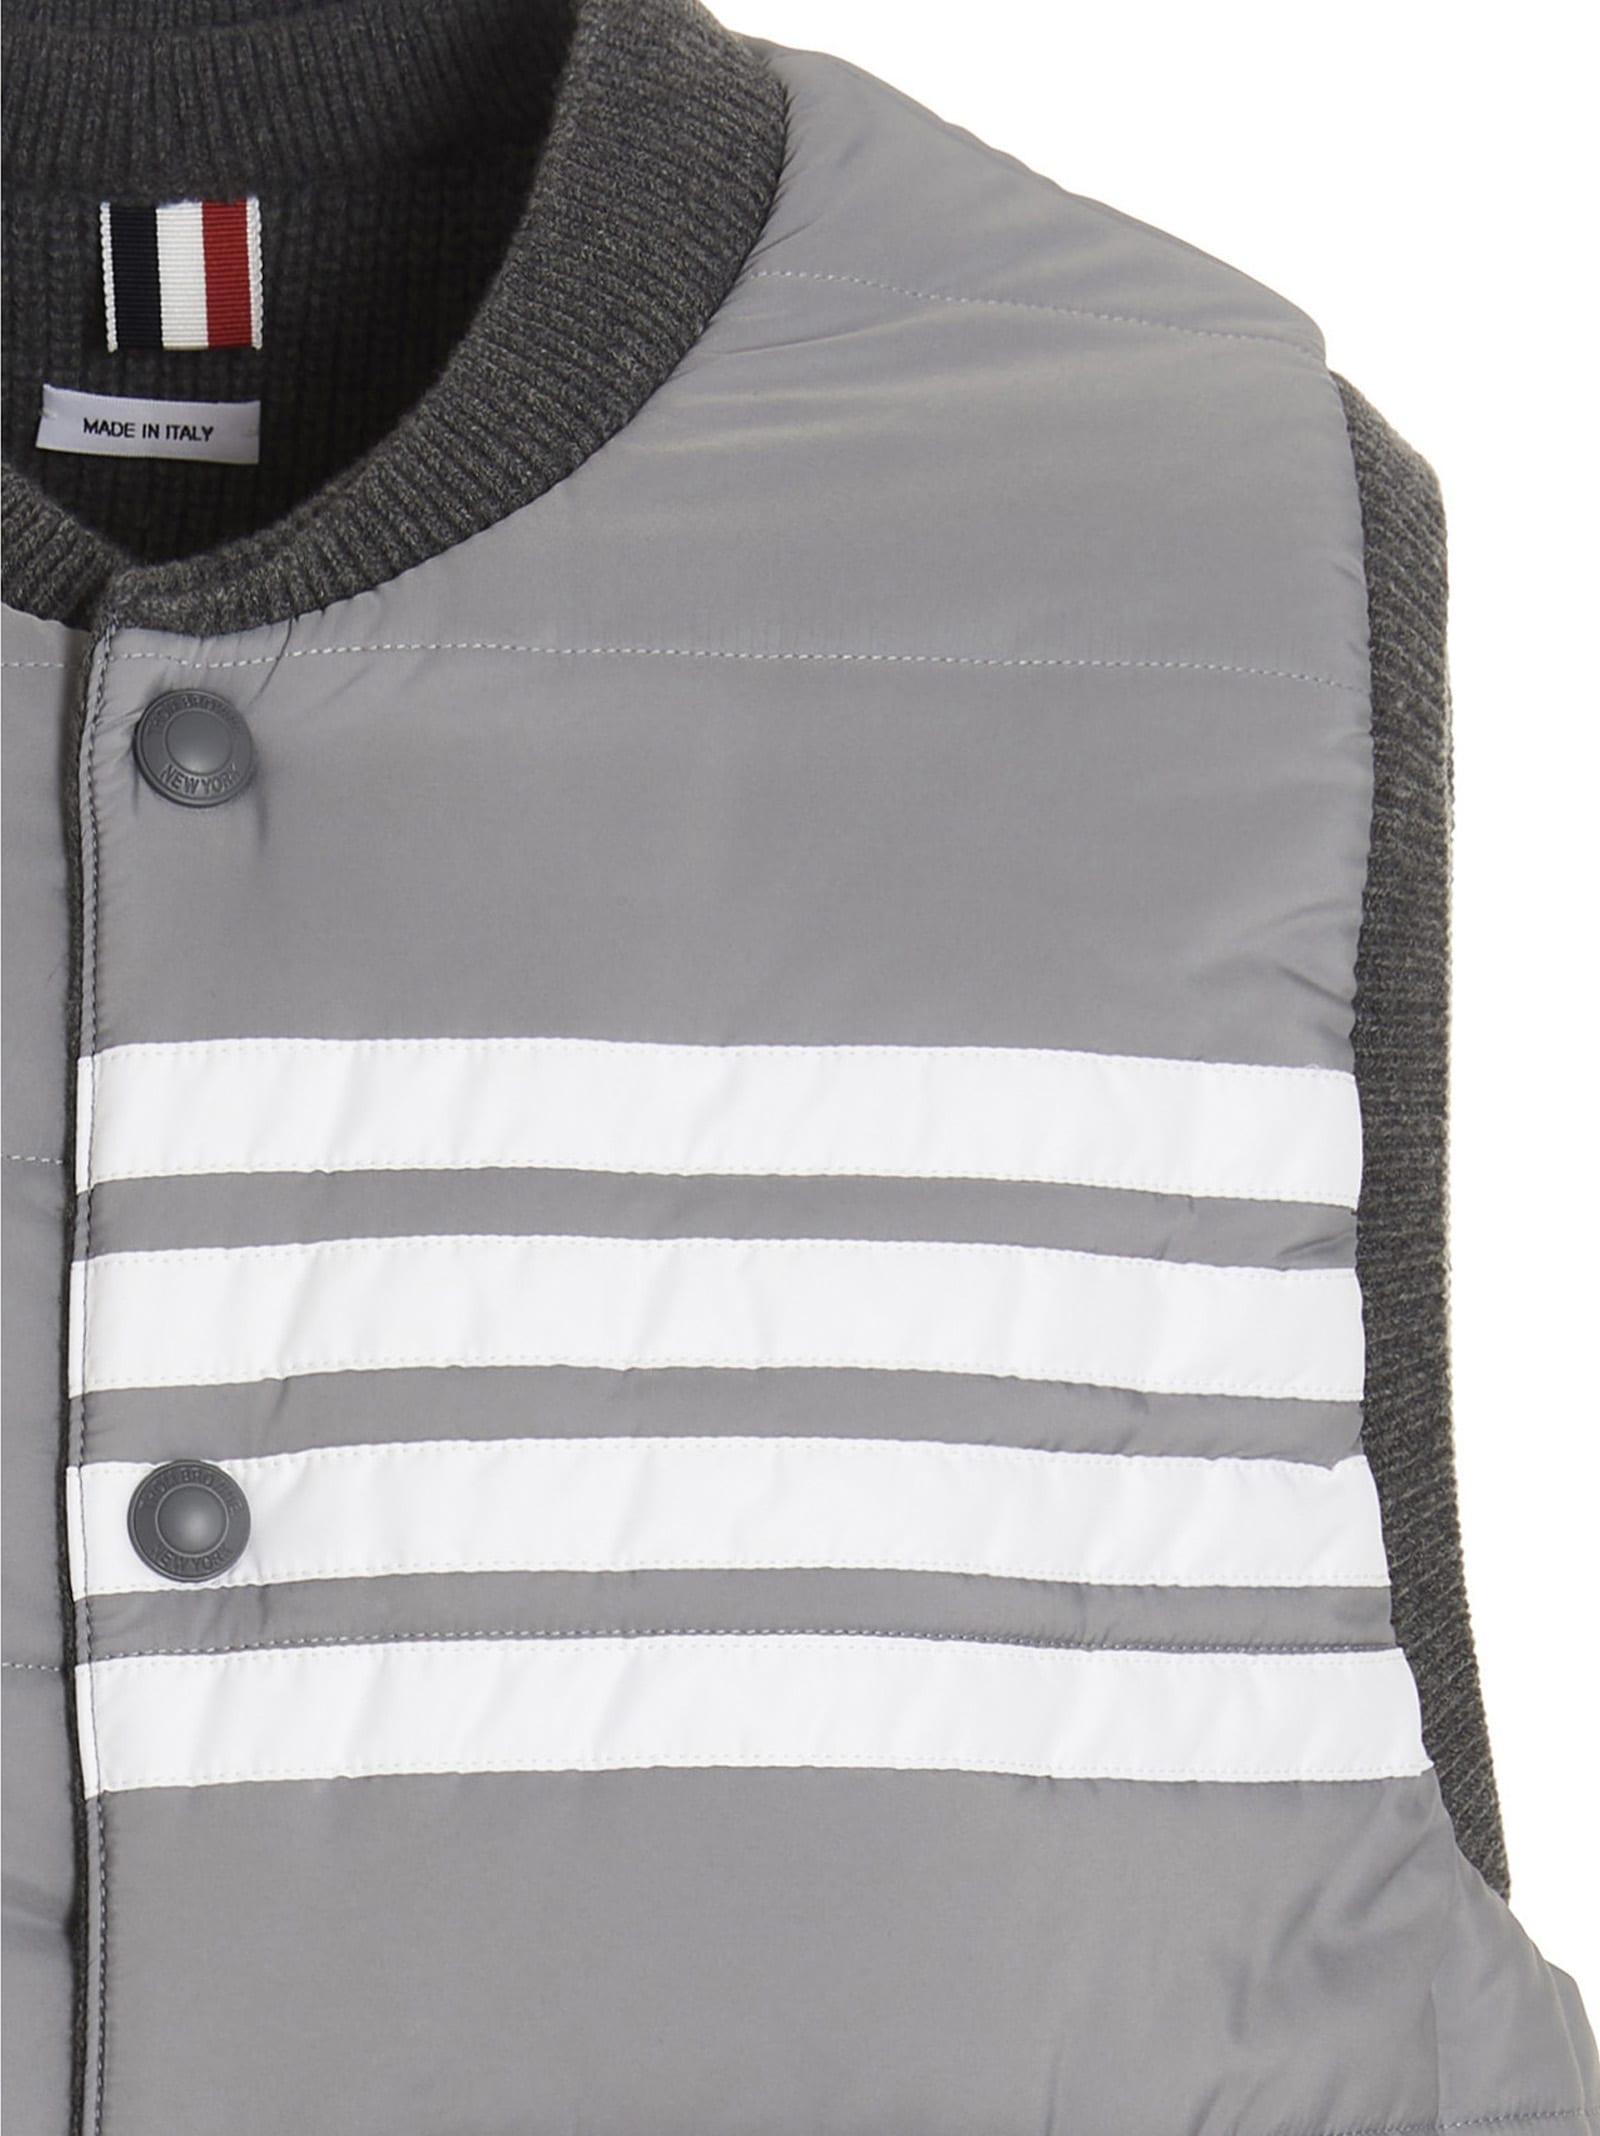 Mens Clothing Jackets Waistcoats and gilets Save 19% Thom Browne Synthetic 4 Bar Reversible Jacket in Grey for Men 